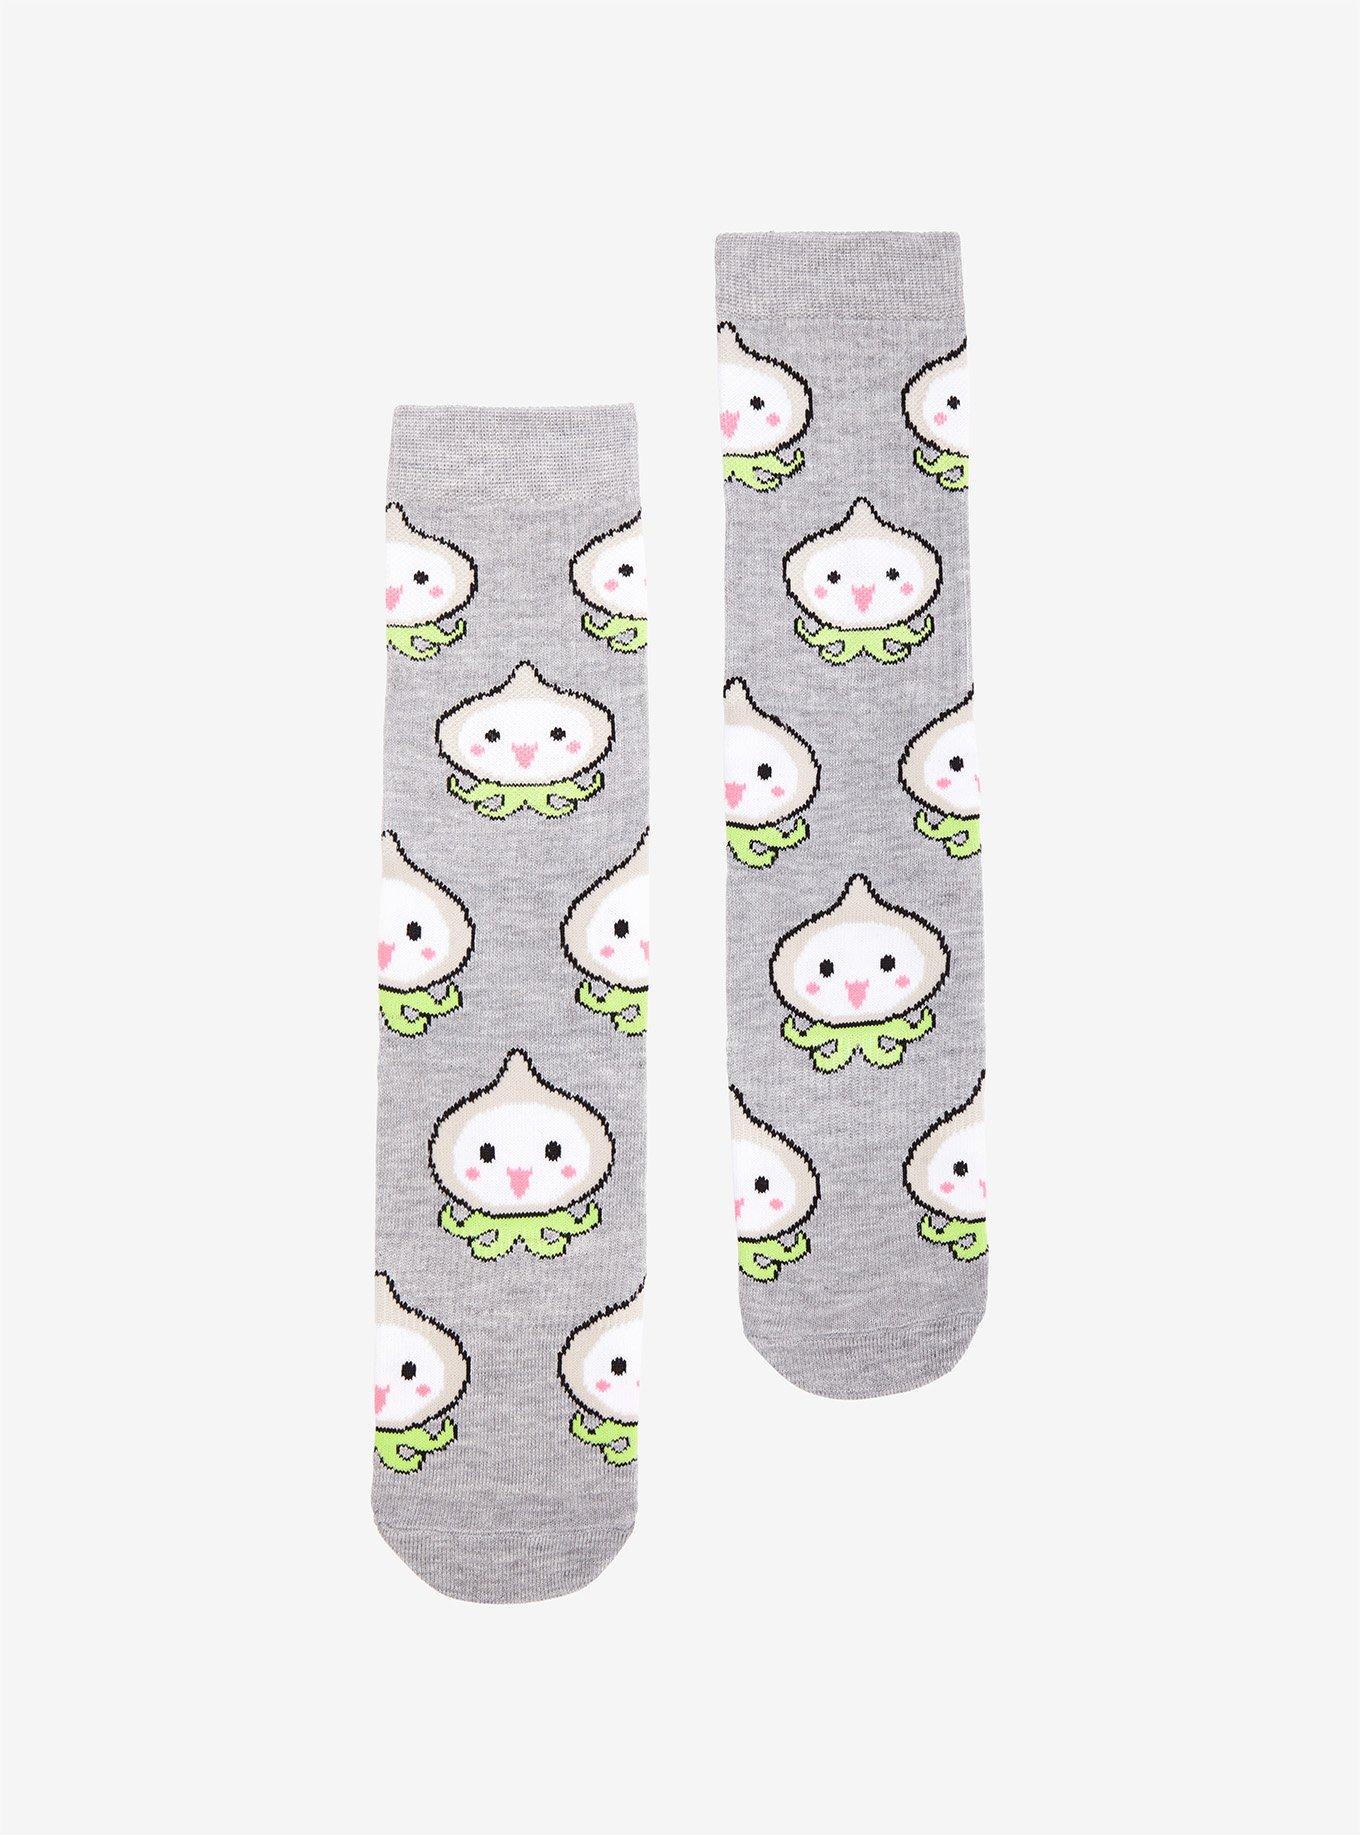 Overwatch Pachimari Allover Print Socks - BoxLunch Exclusive | BoxLunch